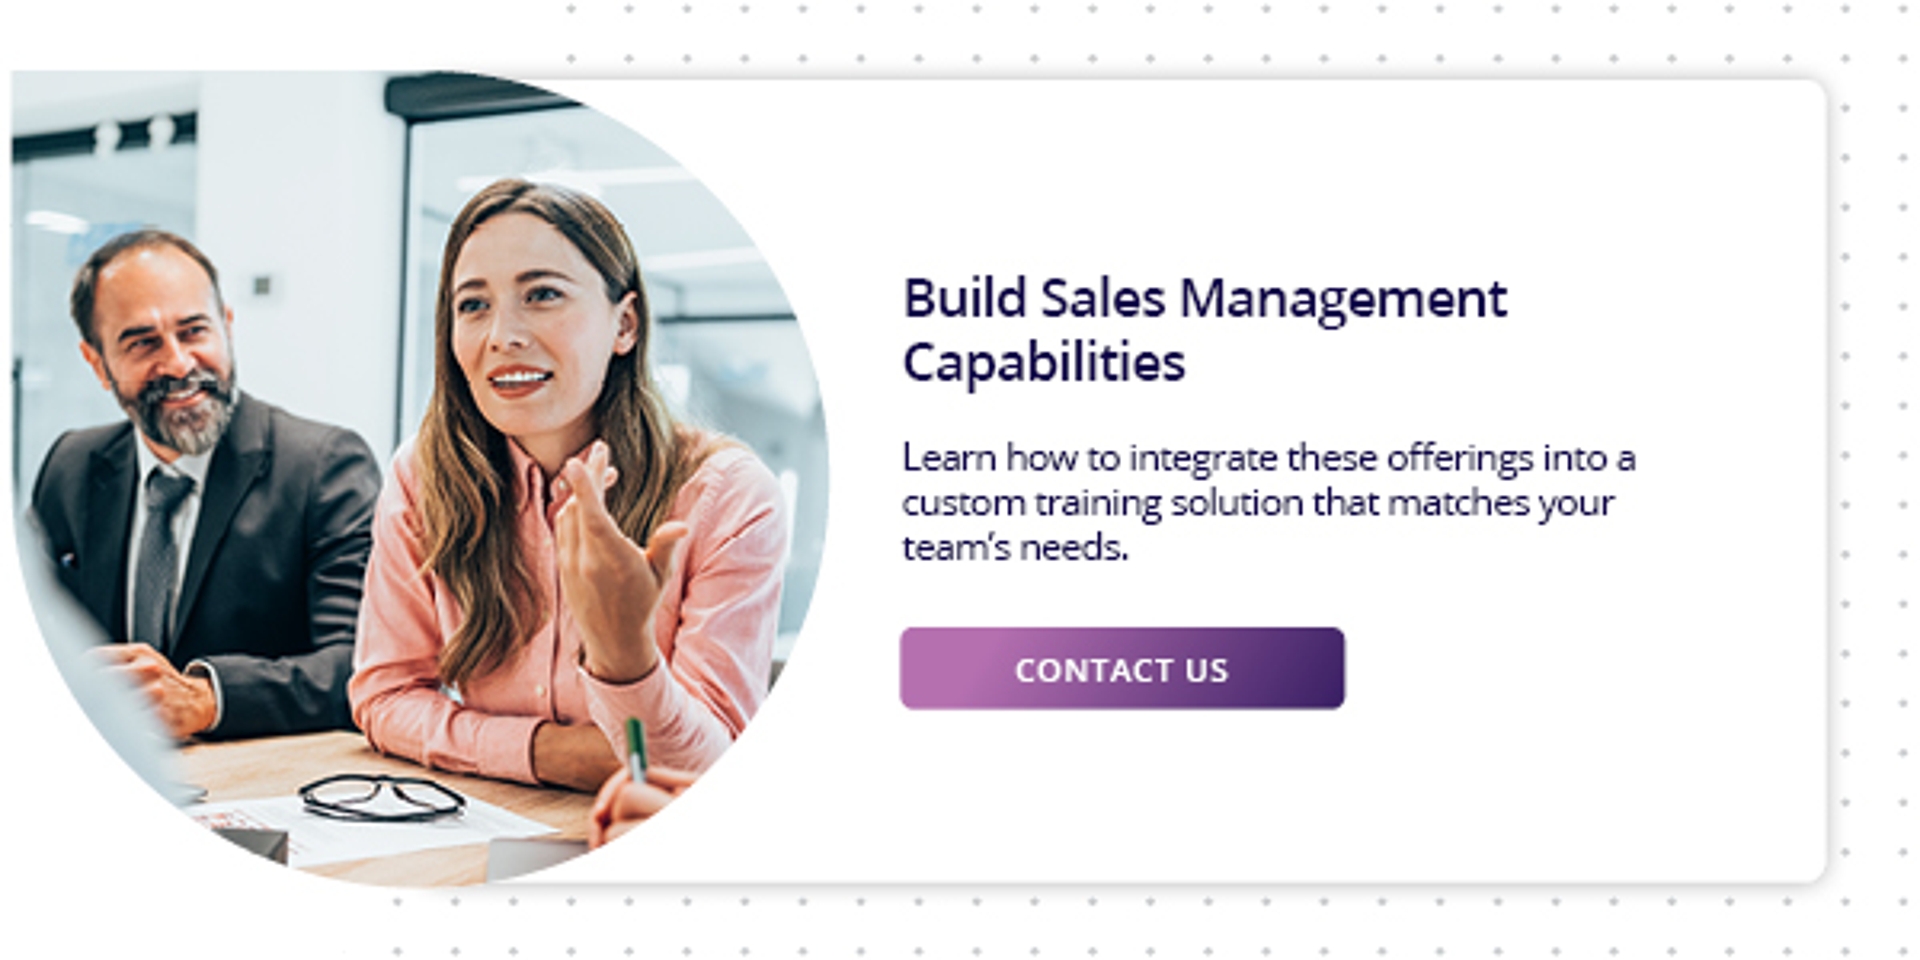 click here to contact richardson to talk about building a sales management capabilities training solution